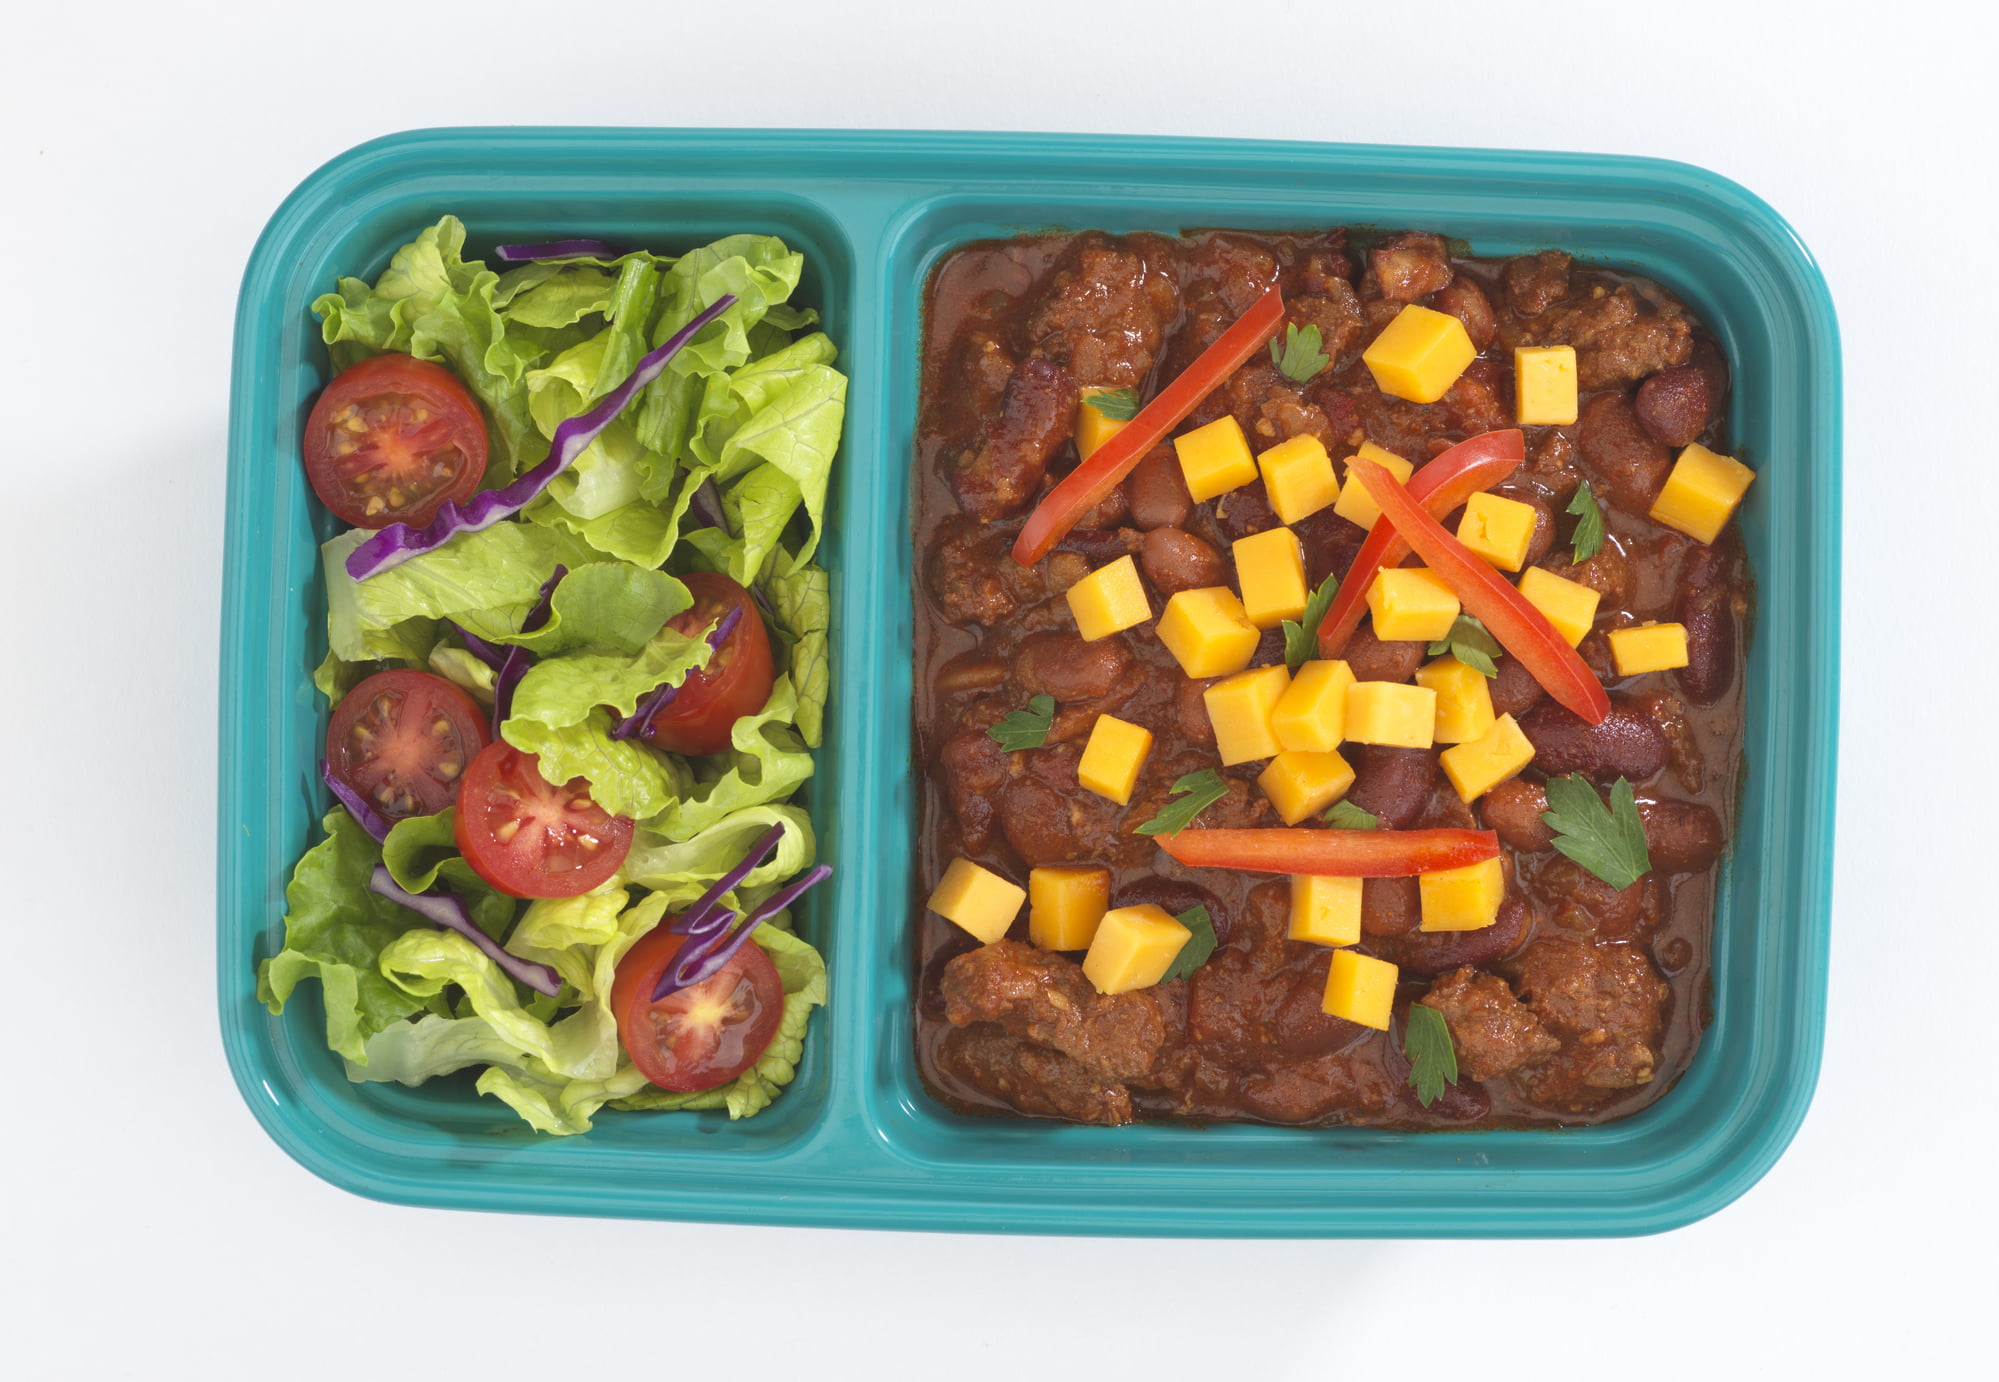 GoodCook Meal Prep Containers are B1G1 FREE at Kroger! - Kroger Krazy